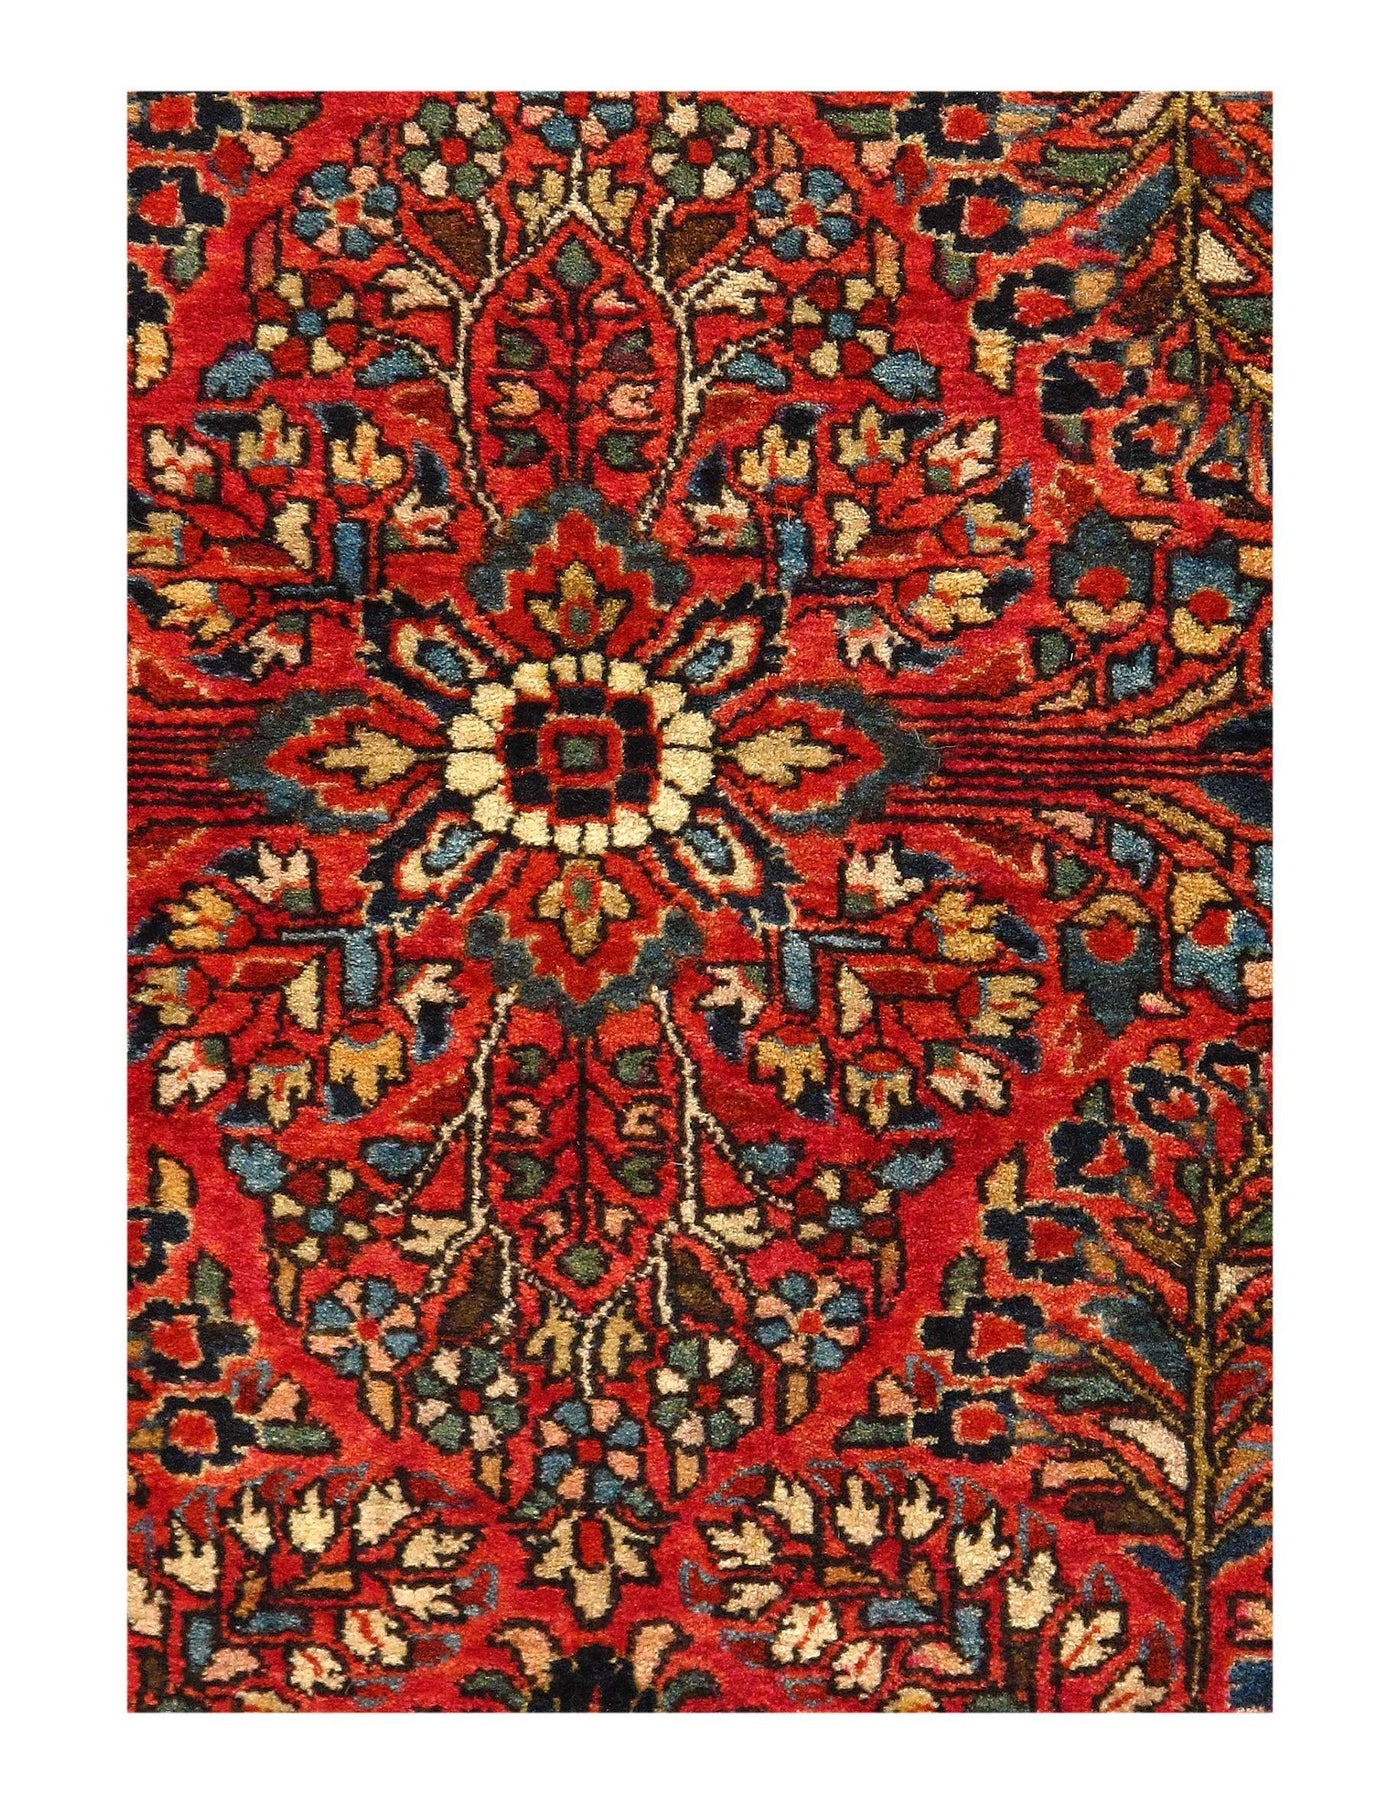 Canvello Antique Sarouk Blue And Red Persian Rug - 3'4'' X 4'9''